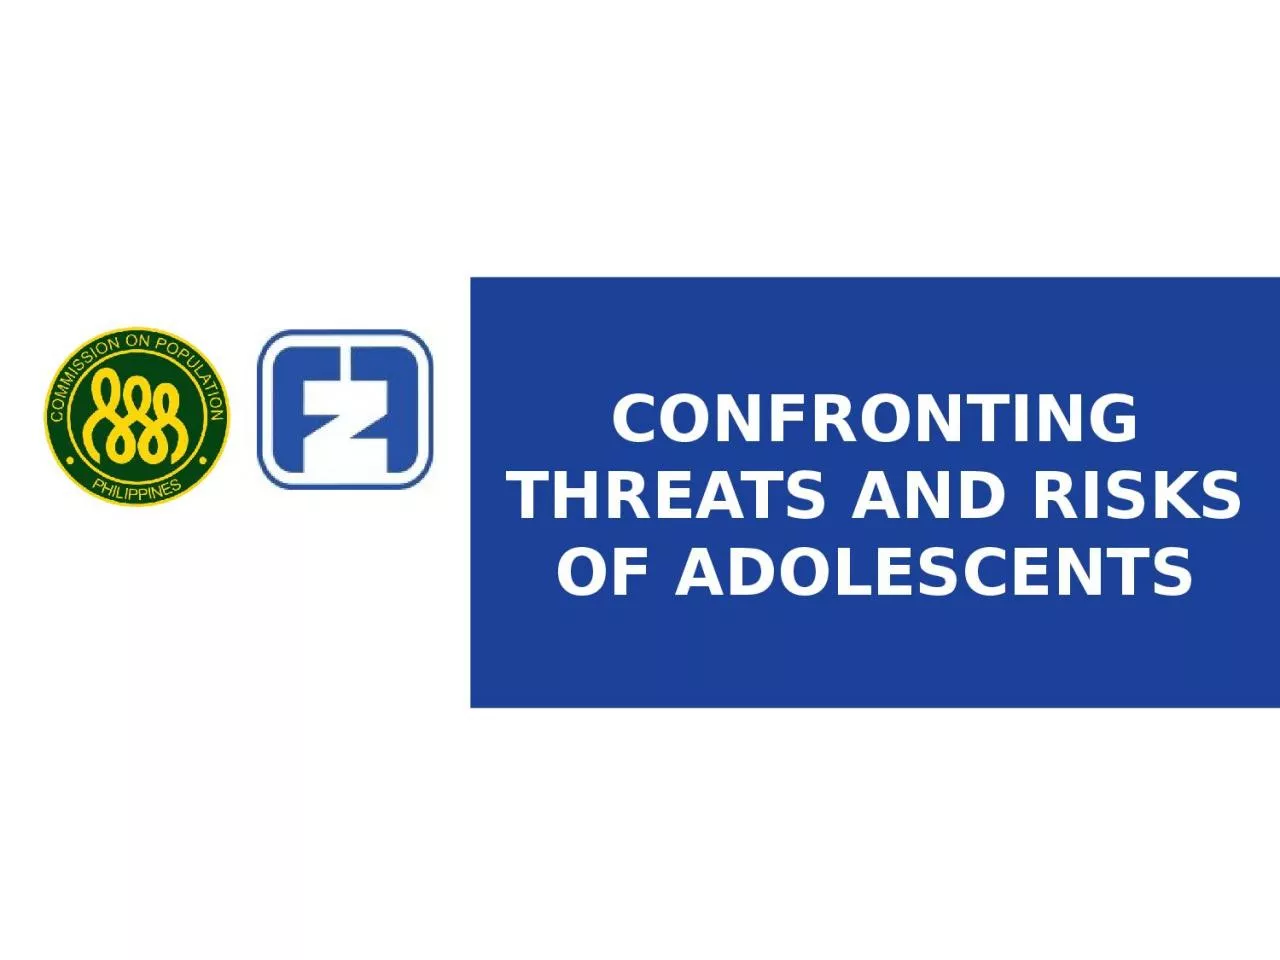 CONFRONTING THREATS AND RISKS OF ADOLESCENTS